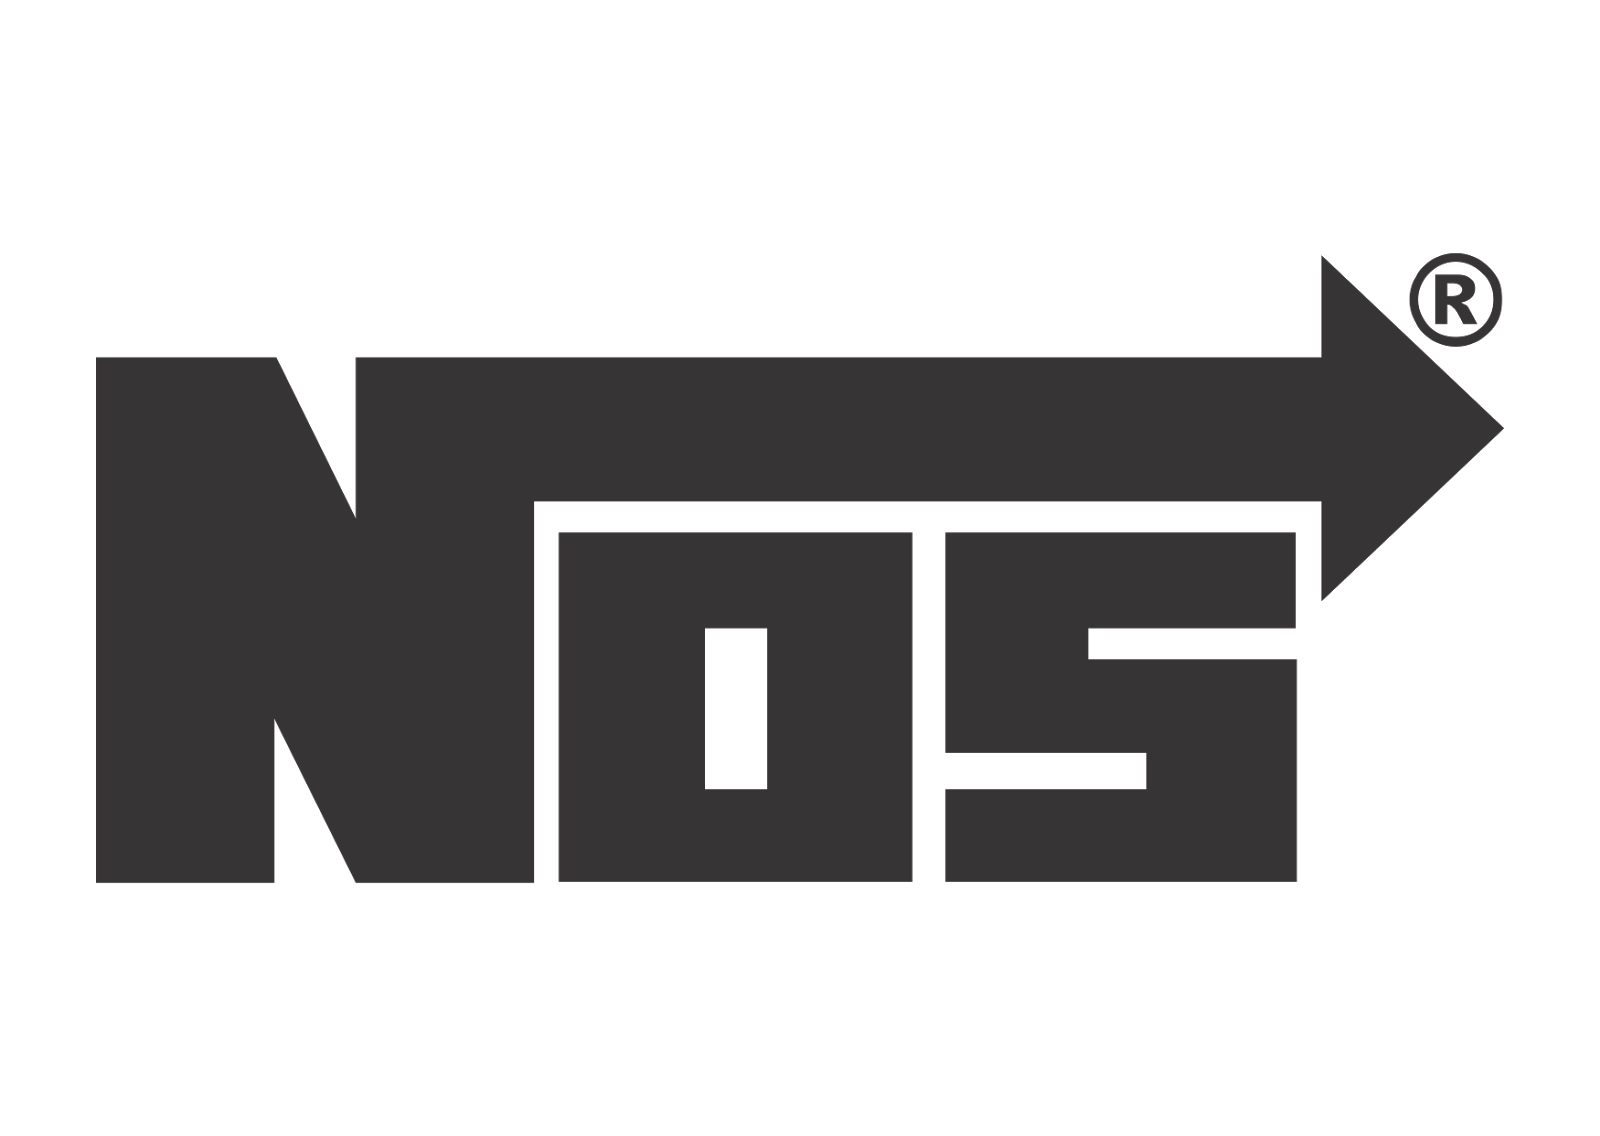 Engine Wall Car Sticker Nitrous Oxide Decal PNG Image